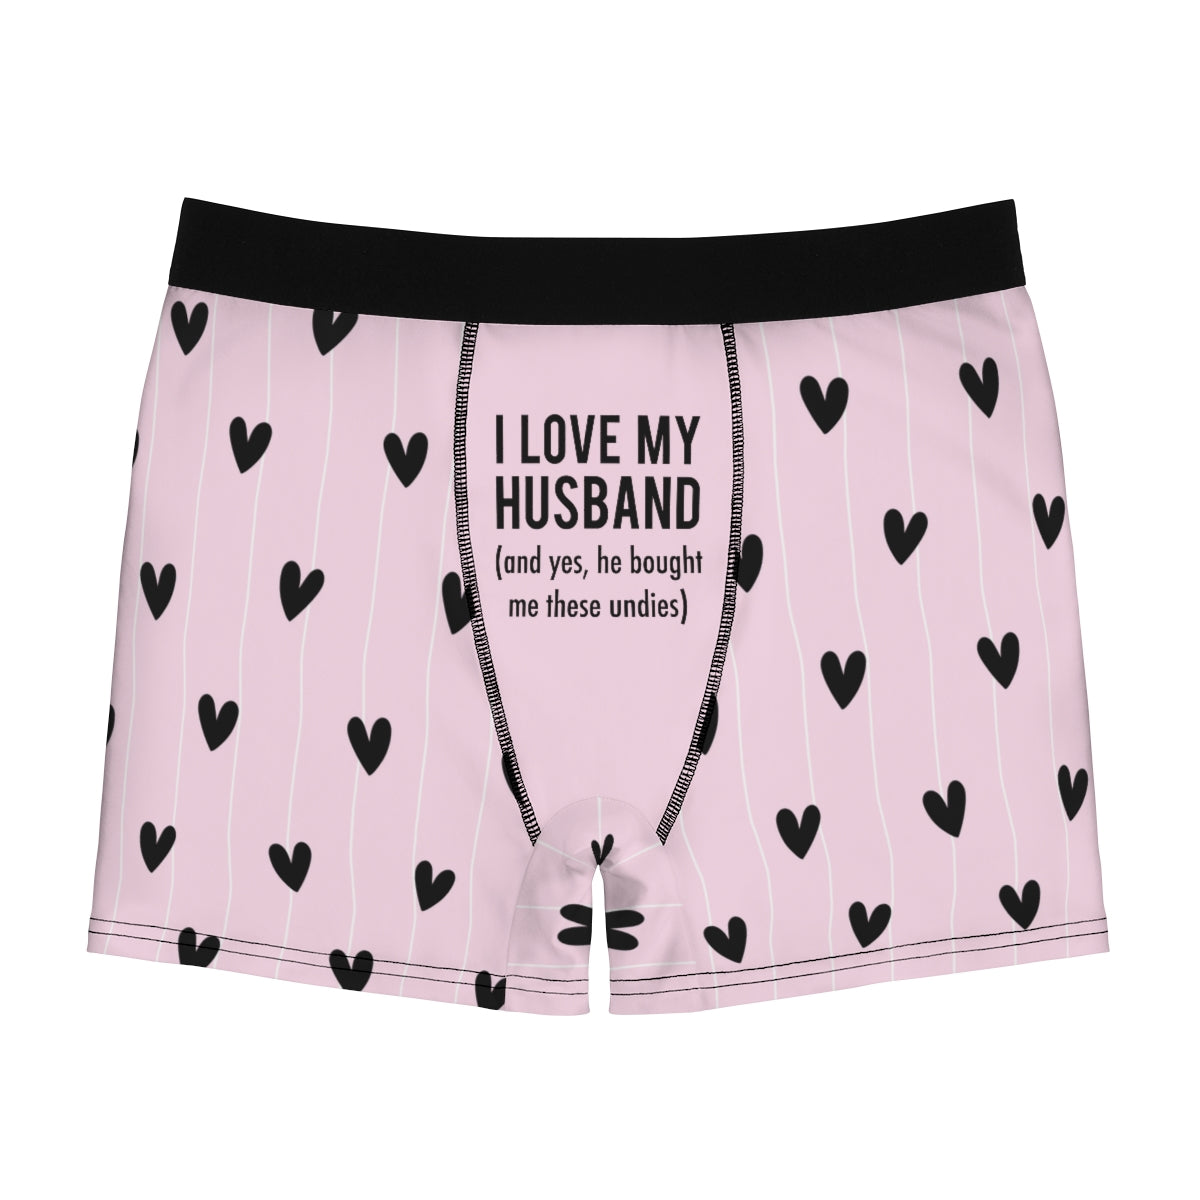 I Love My Wife/Girlfriend/Honey - Personalized Husband And Wife Men's Boxer  Briefs